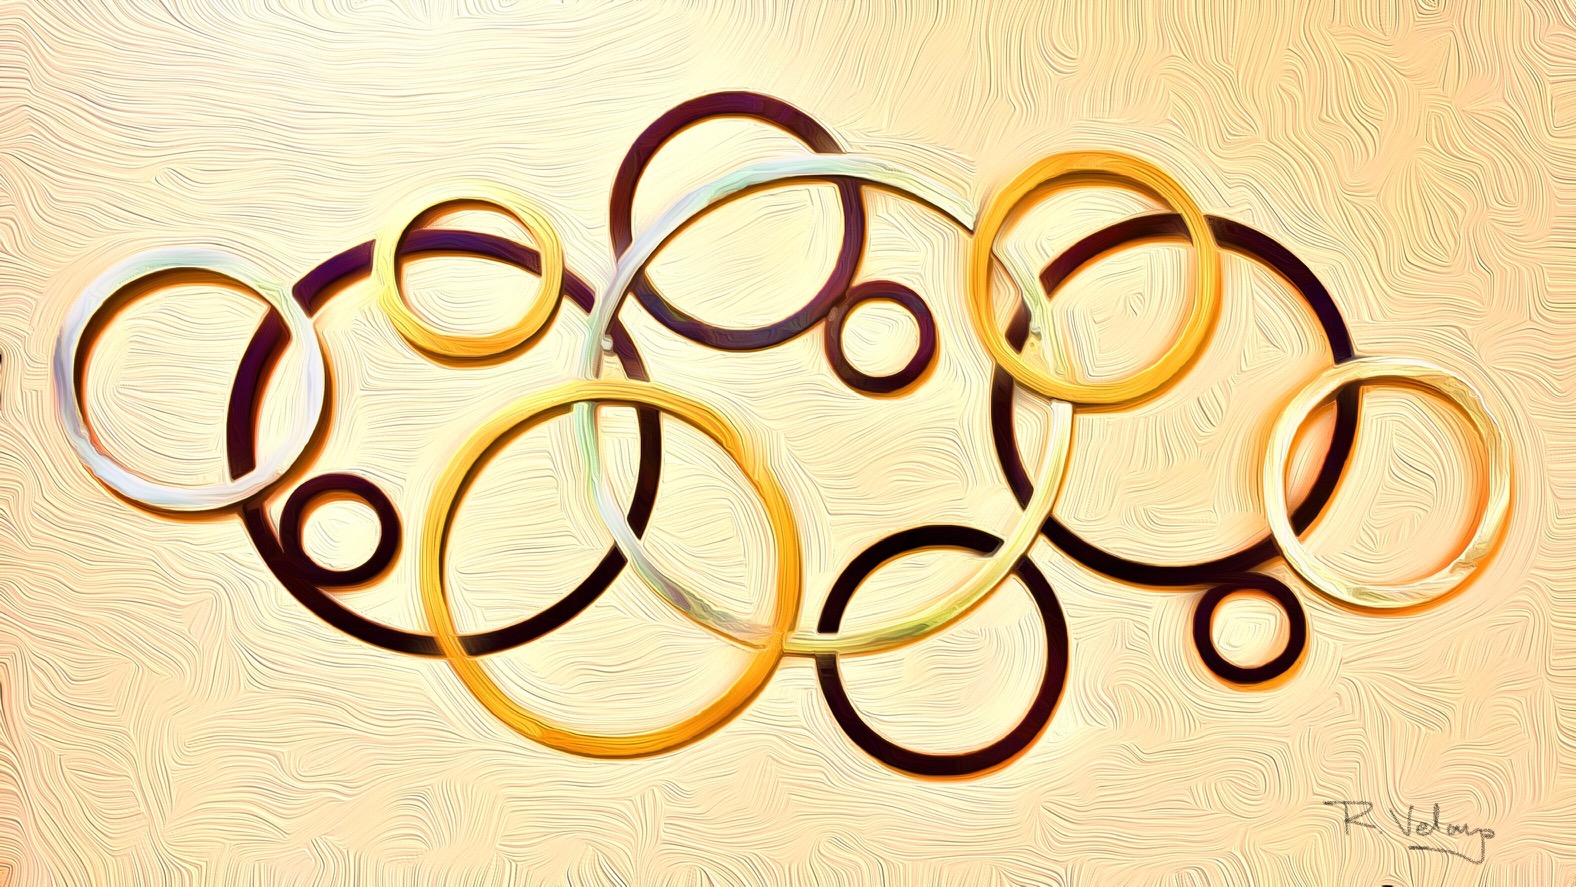 "OVERLAPPING CIRCLES GOLD SILVER AND BRONZE" [Created: 5/05/2021]